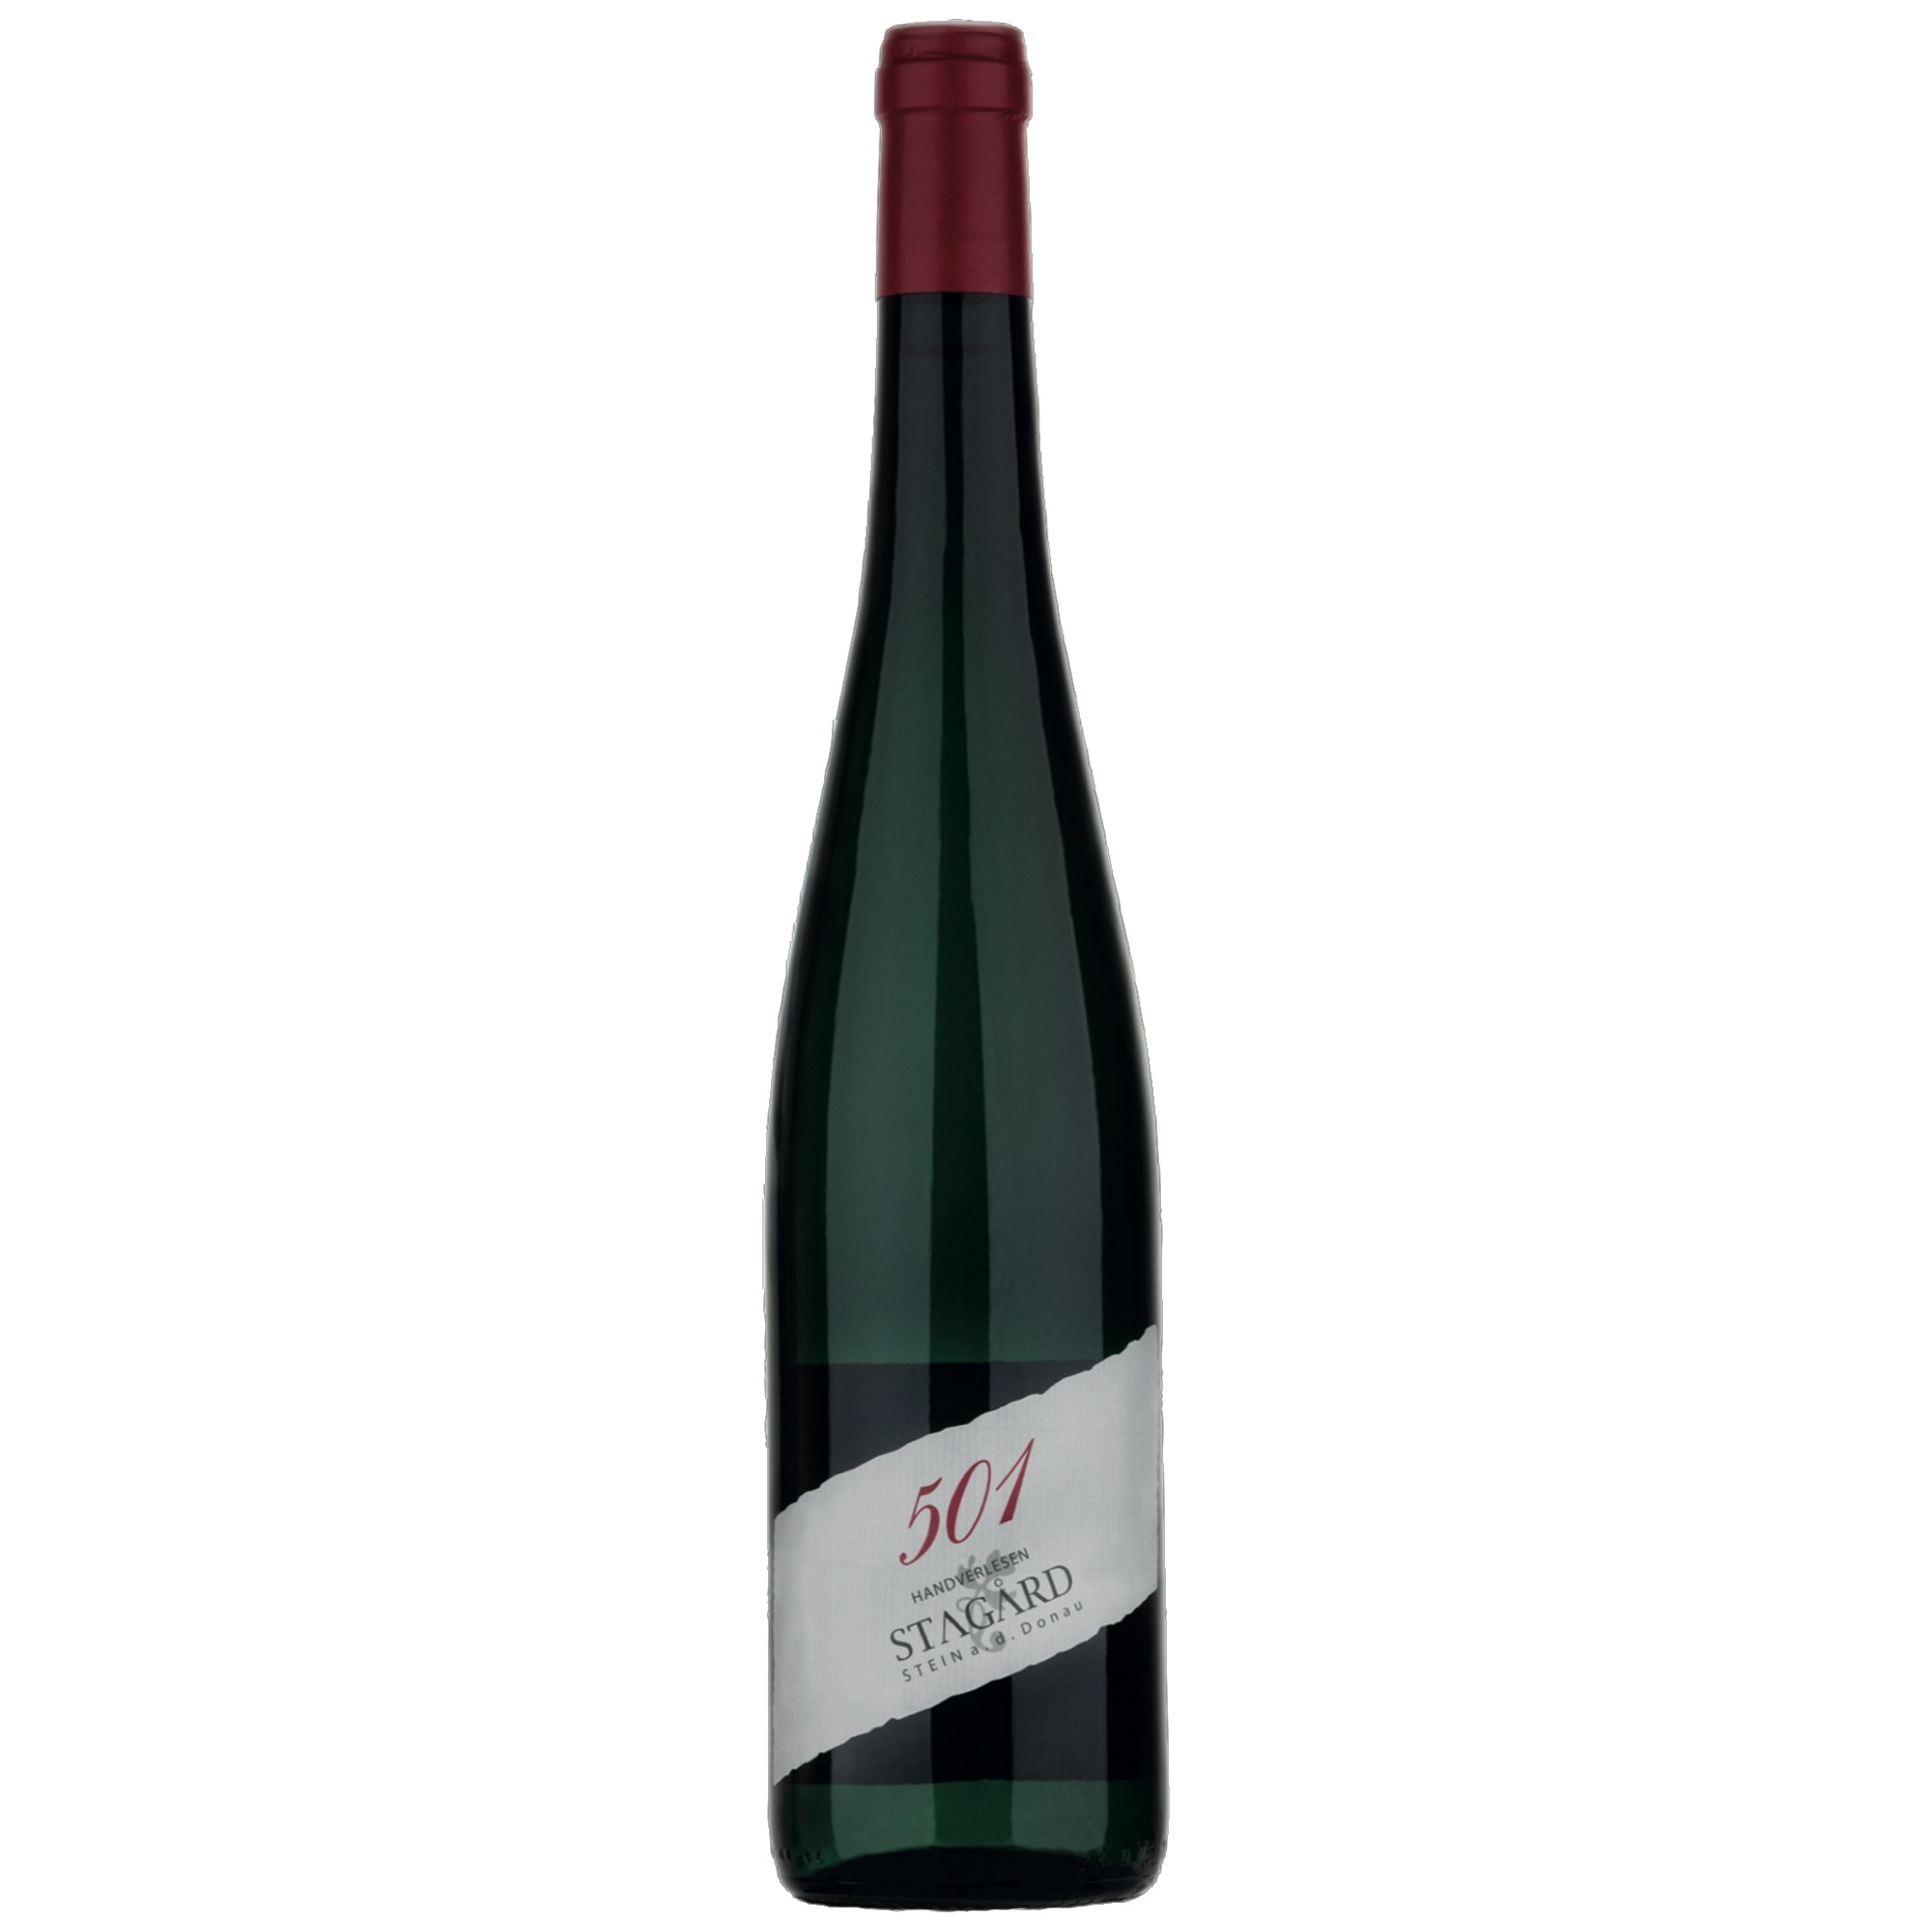 Stagard Riesling 501 0,75l, 2019